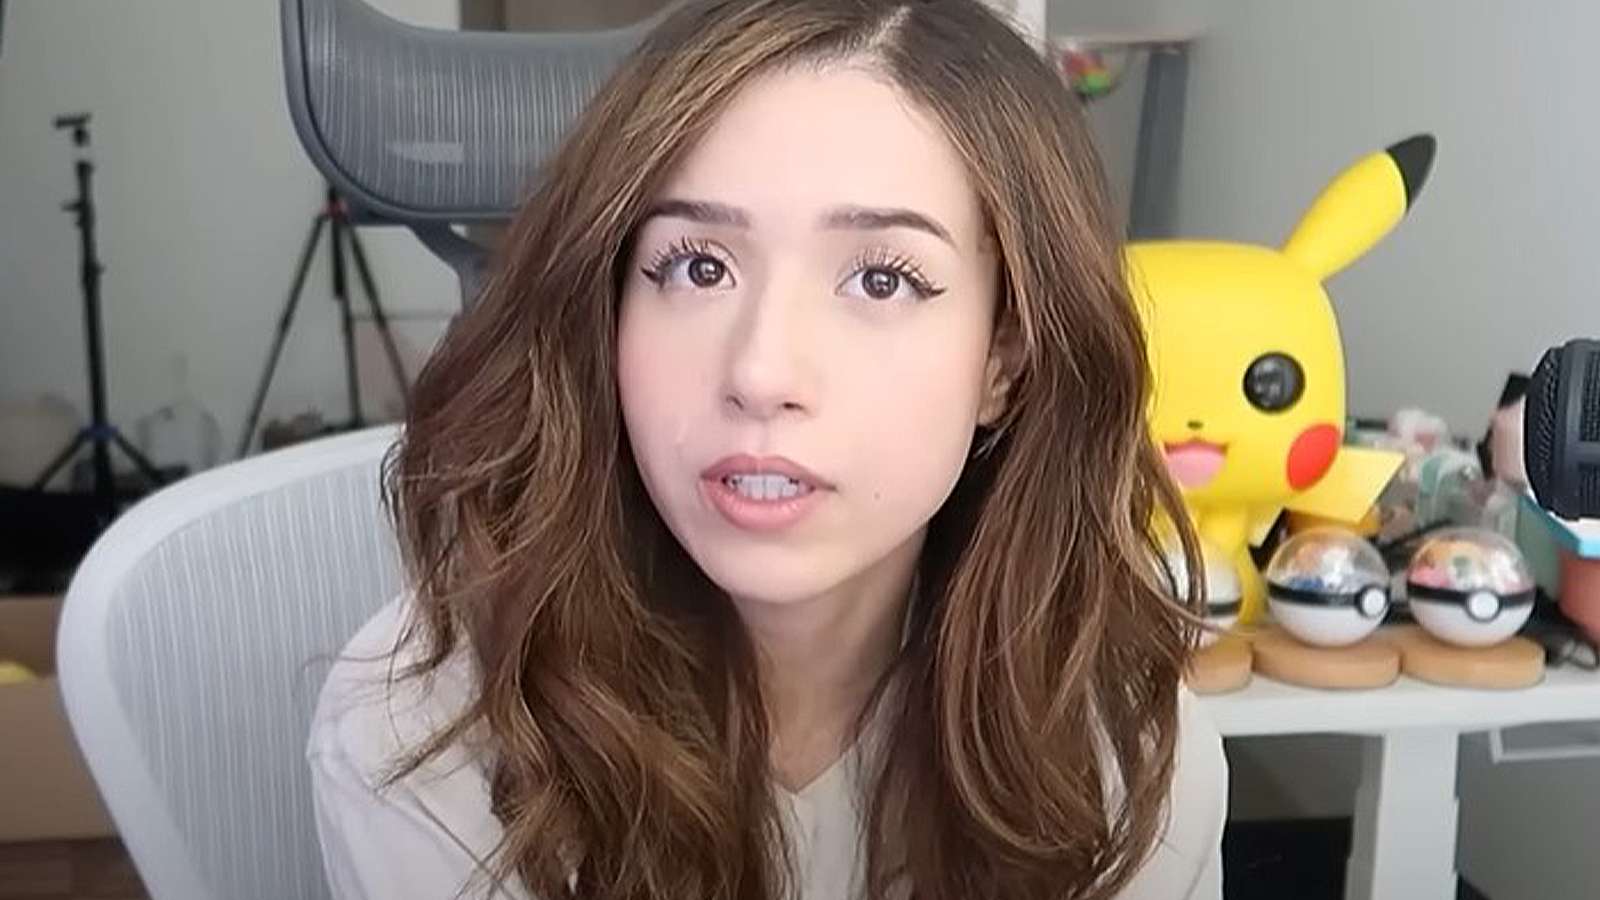 Pokimane says CEO tried to pay off her friend to set up a meeting with her